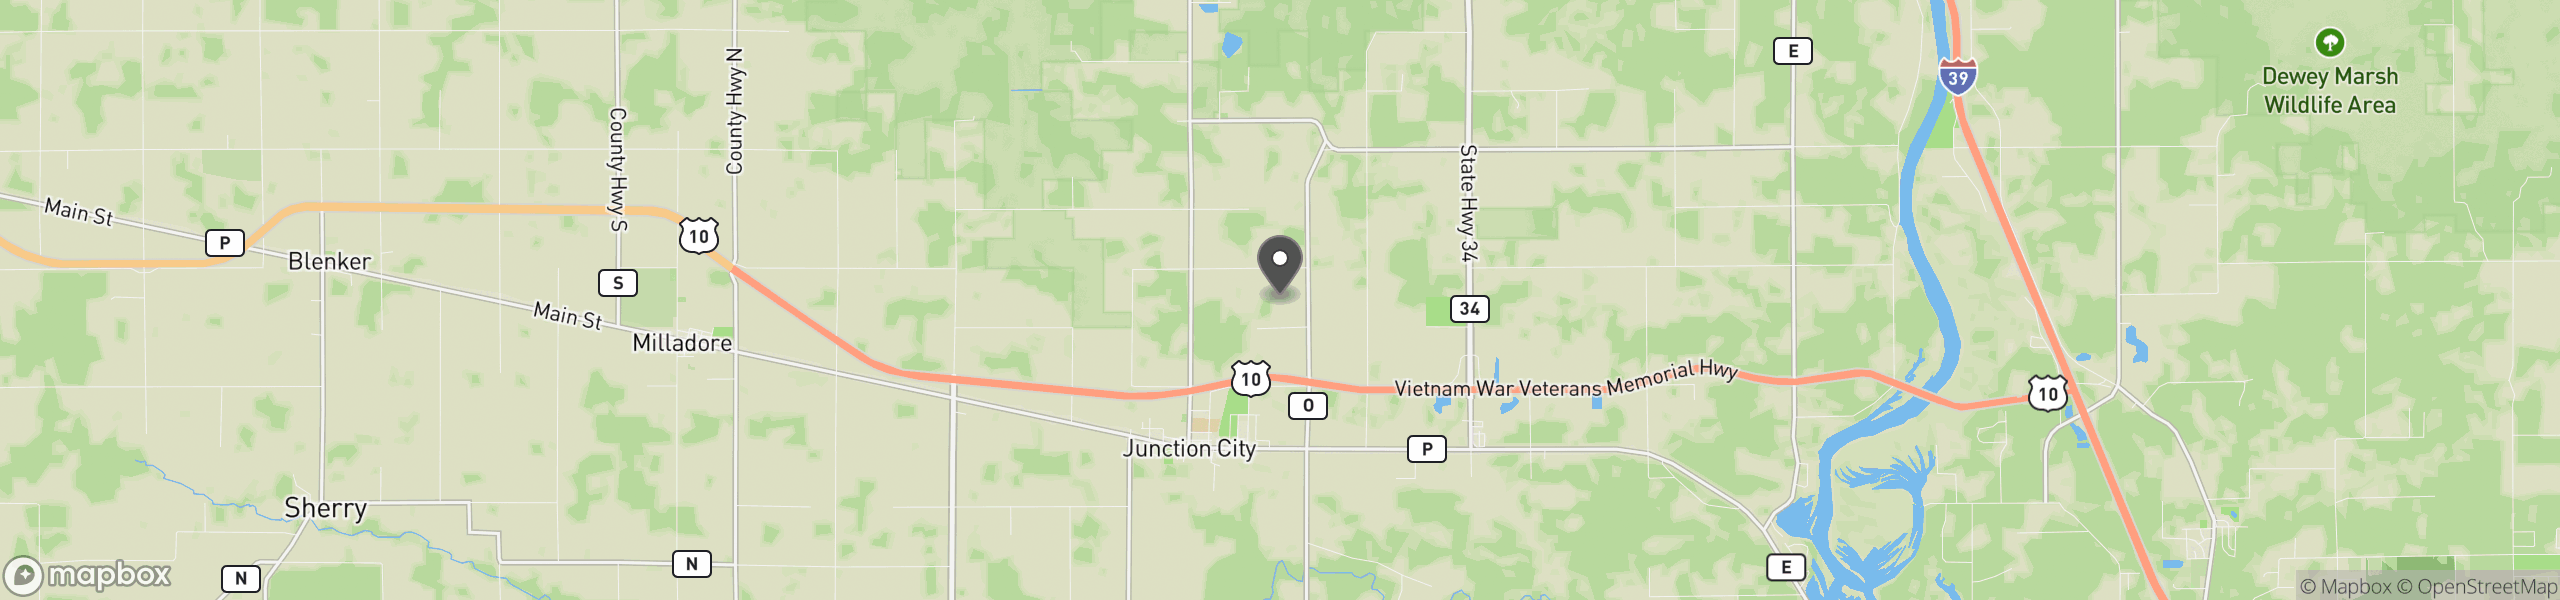 Junction City, WI 54443